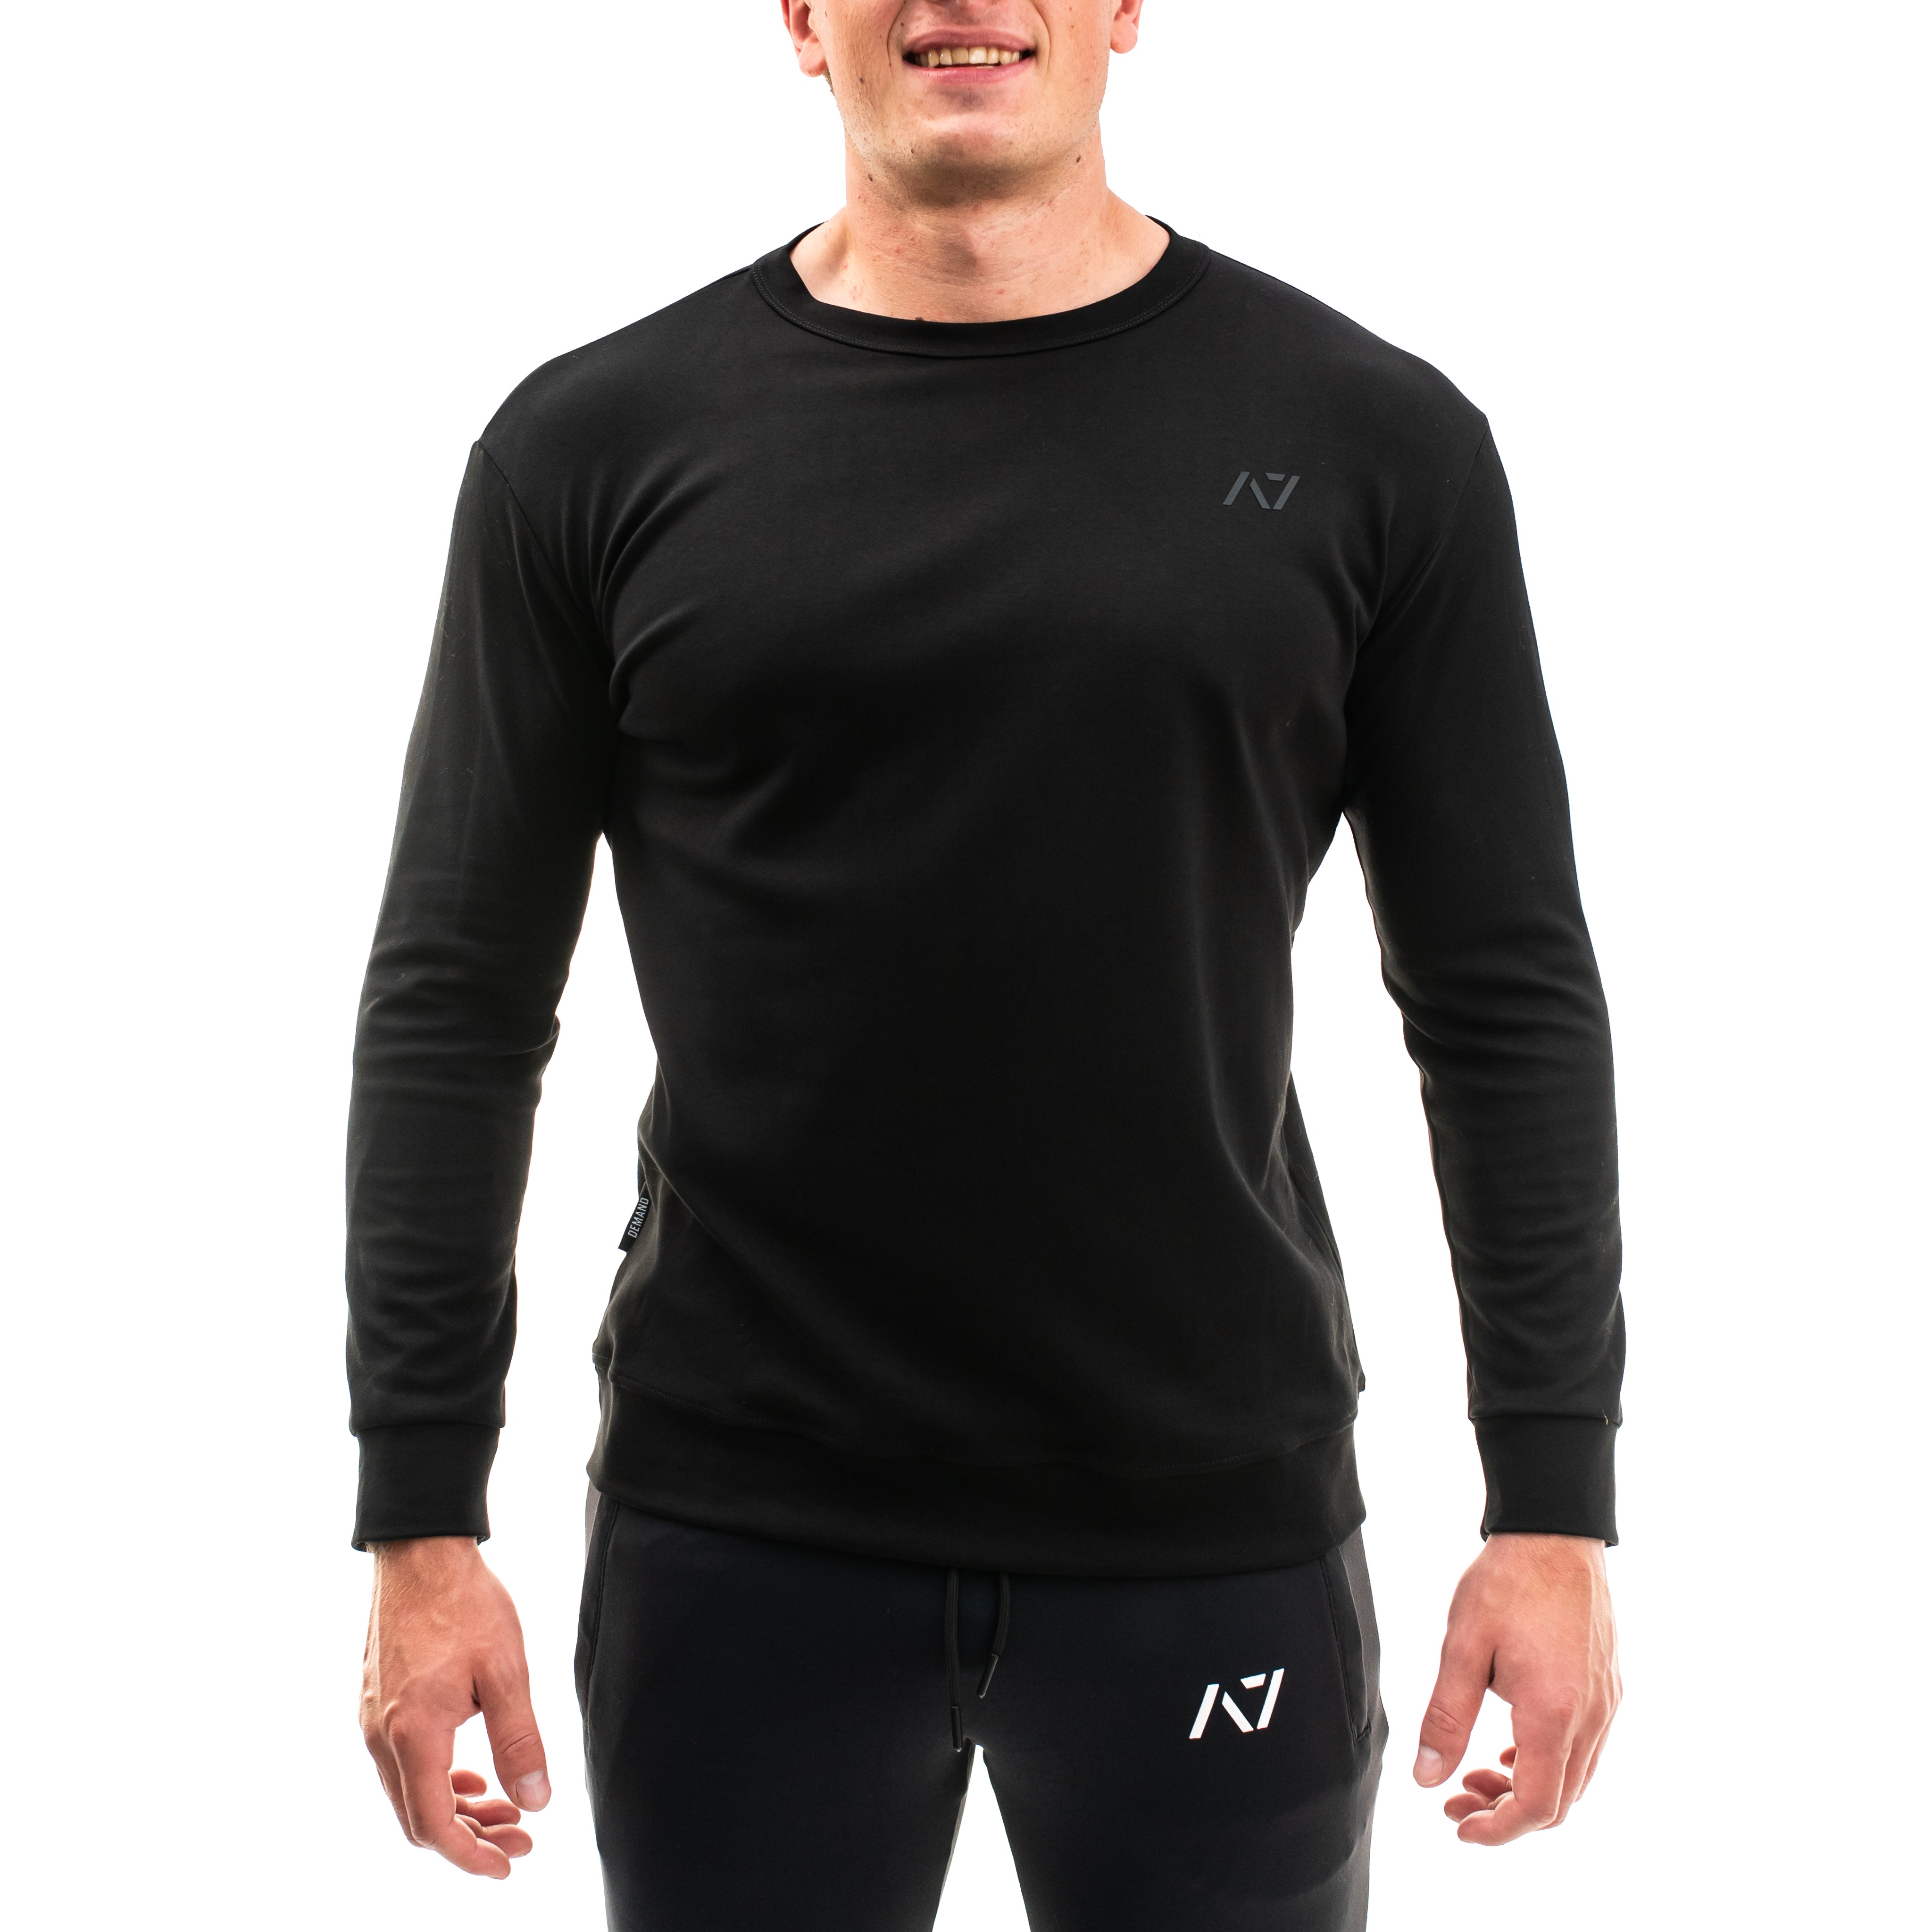 A7 Moxie Crewnecks are part of the A7 balance collection which combines comfort and aesthetics. The pieces in this collection are made with comfortable fabrics and minimal logos to create a simple, yet impactful look. Moxie Crewnecks have 4-way stretch material to move with your shape. A7 crewneck perfect for in and out the gym. Purchase A7 Moxie Creckneck from A7 Europe. Purchase A7 Moxie Crewneck from A7 UK. Available in UK and Europe including France, Italy, Germany, the Netherlands, Sweden and Poland.